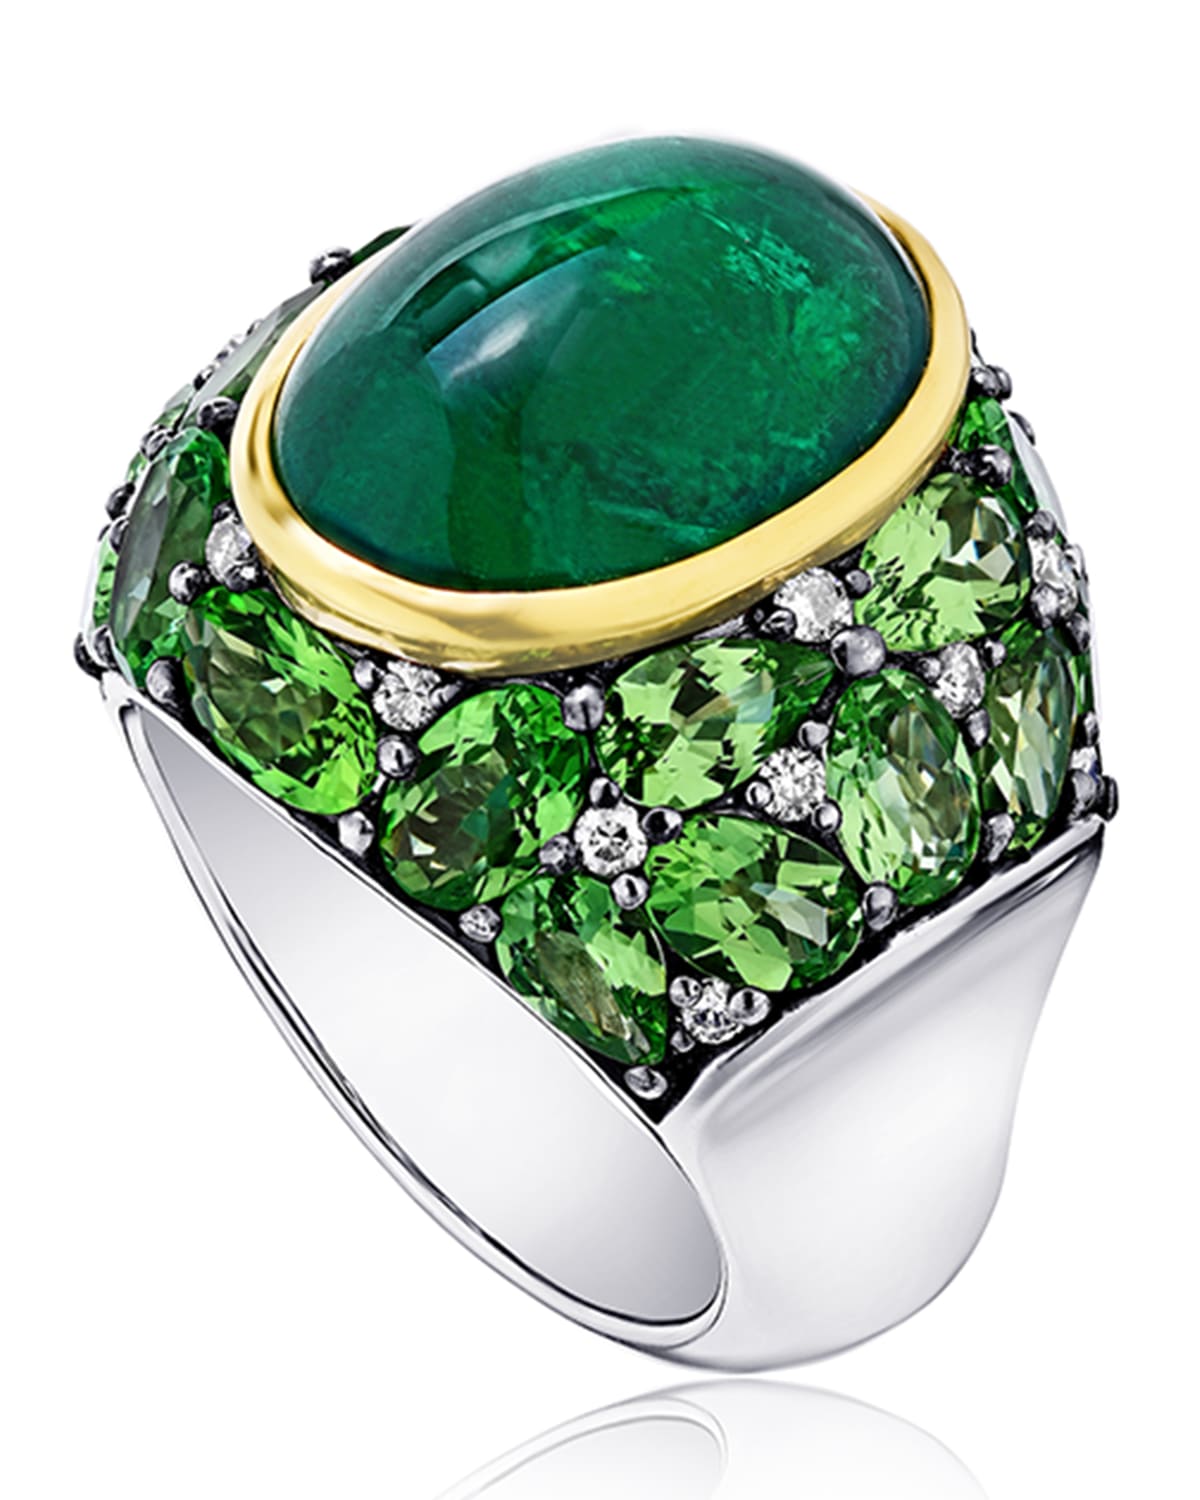 Emerald Oval Ring with Tsavorite and Diamonds, Size 7